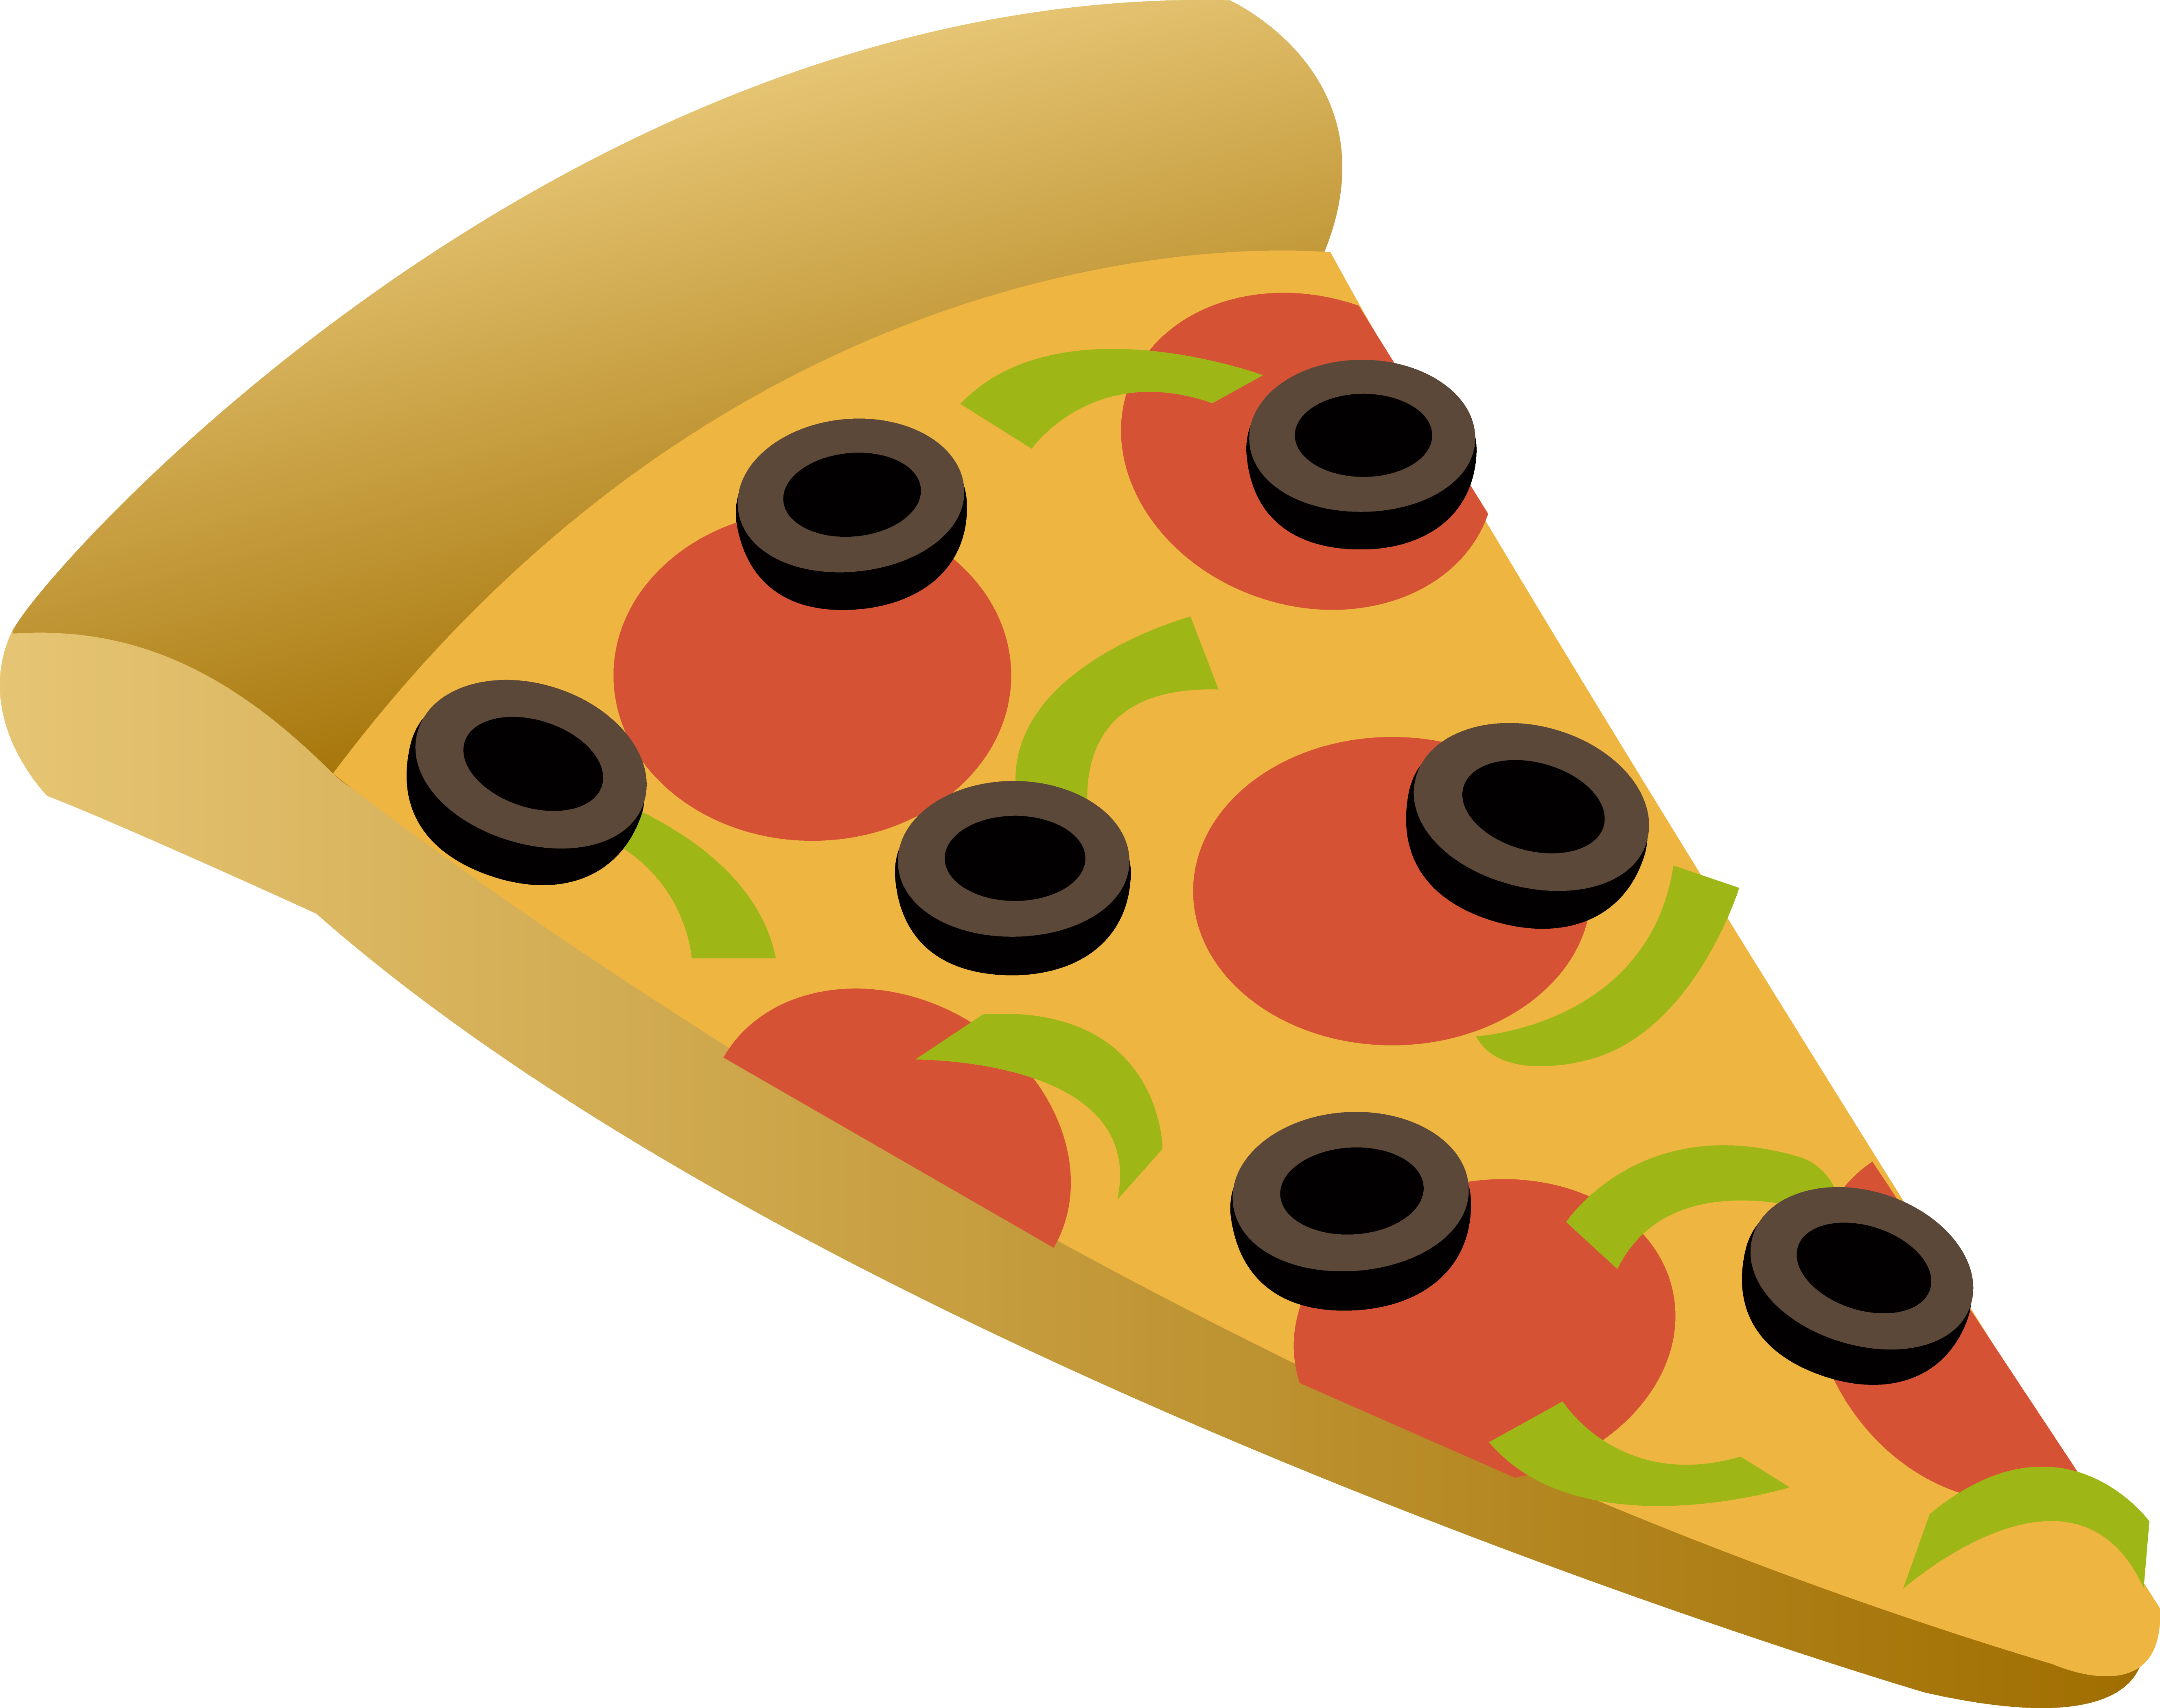 Download Junk Food Pizza Slice Clipart - Pizza PNG Image with No Background  